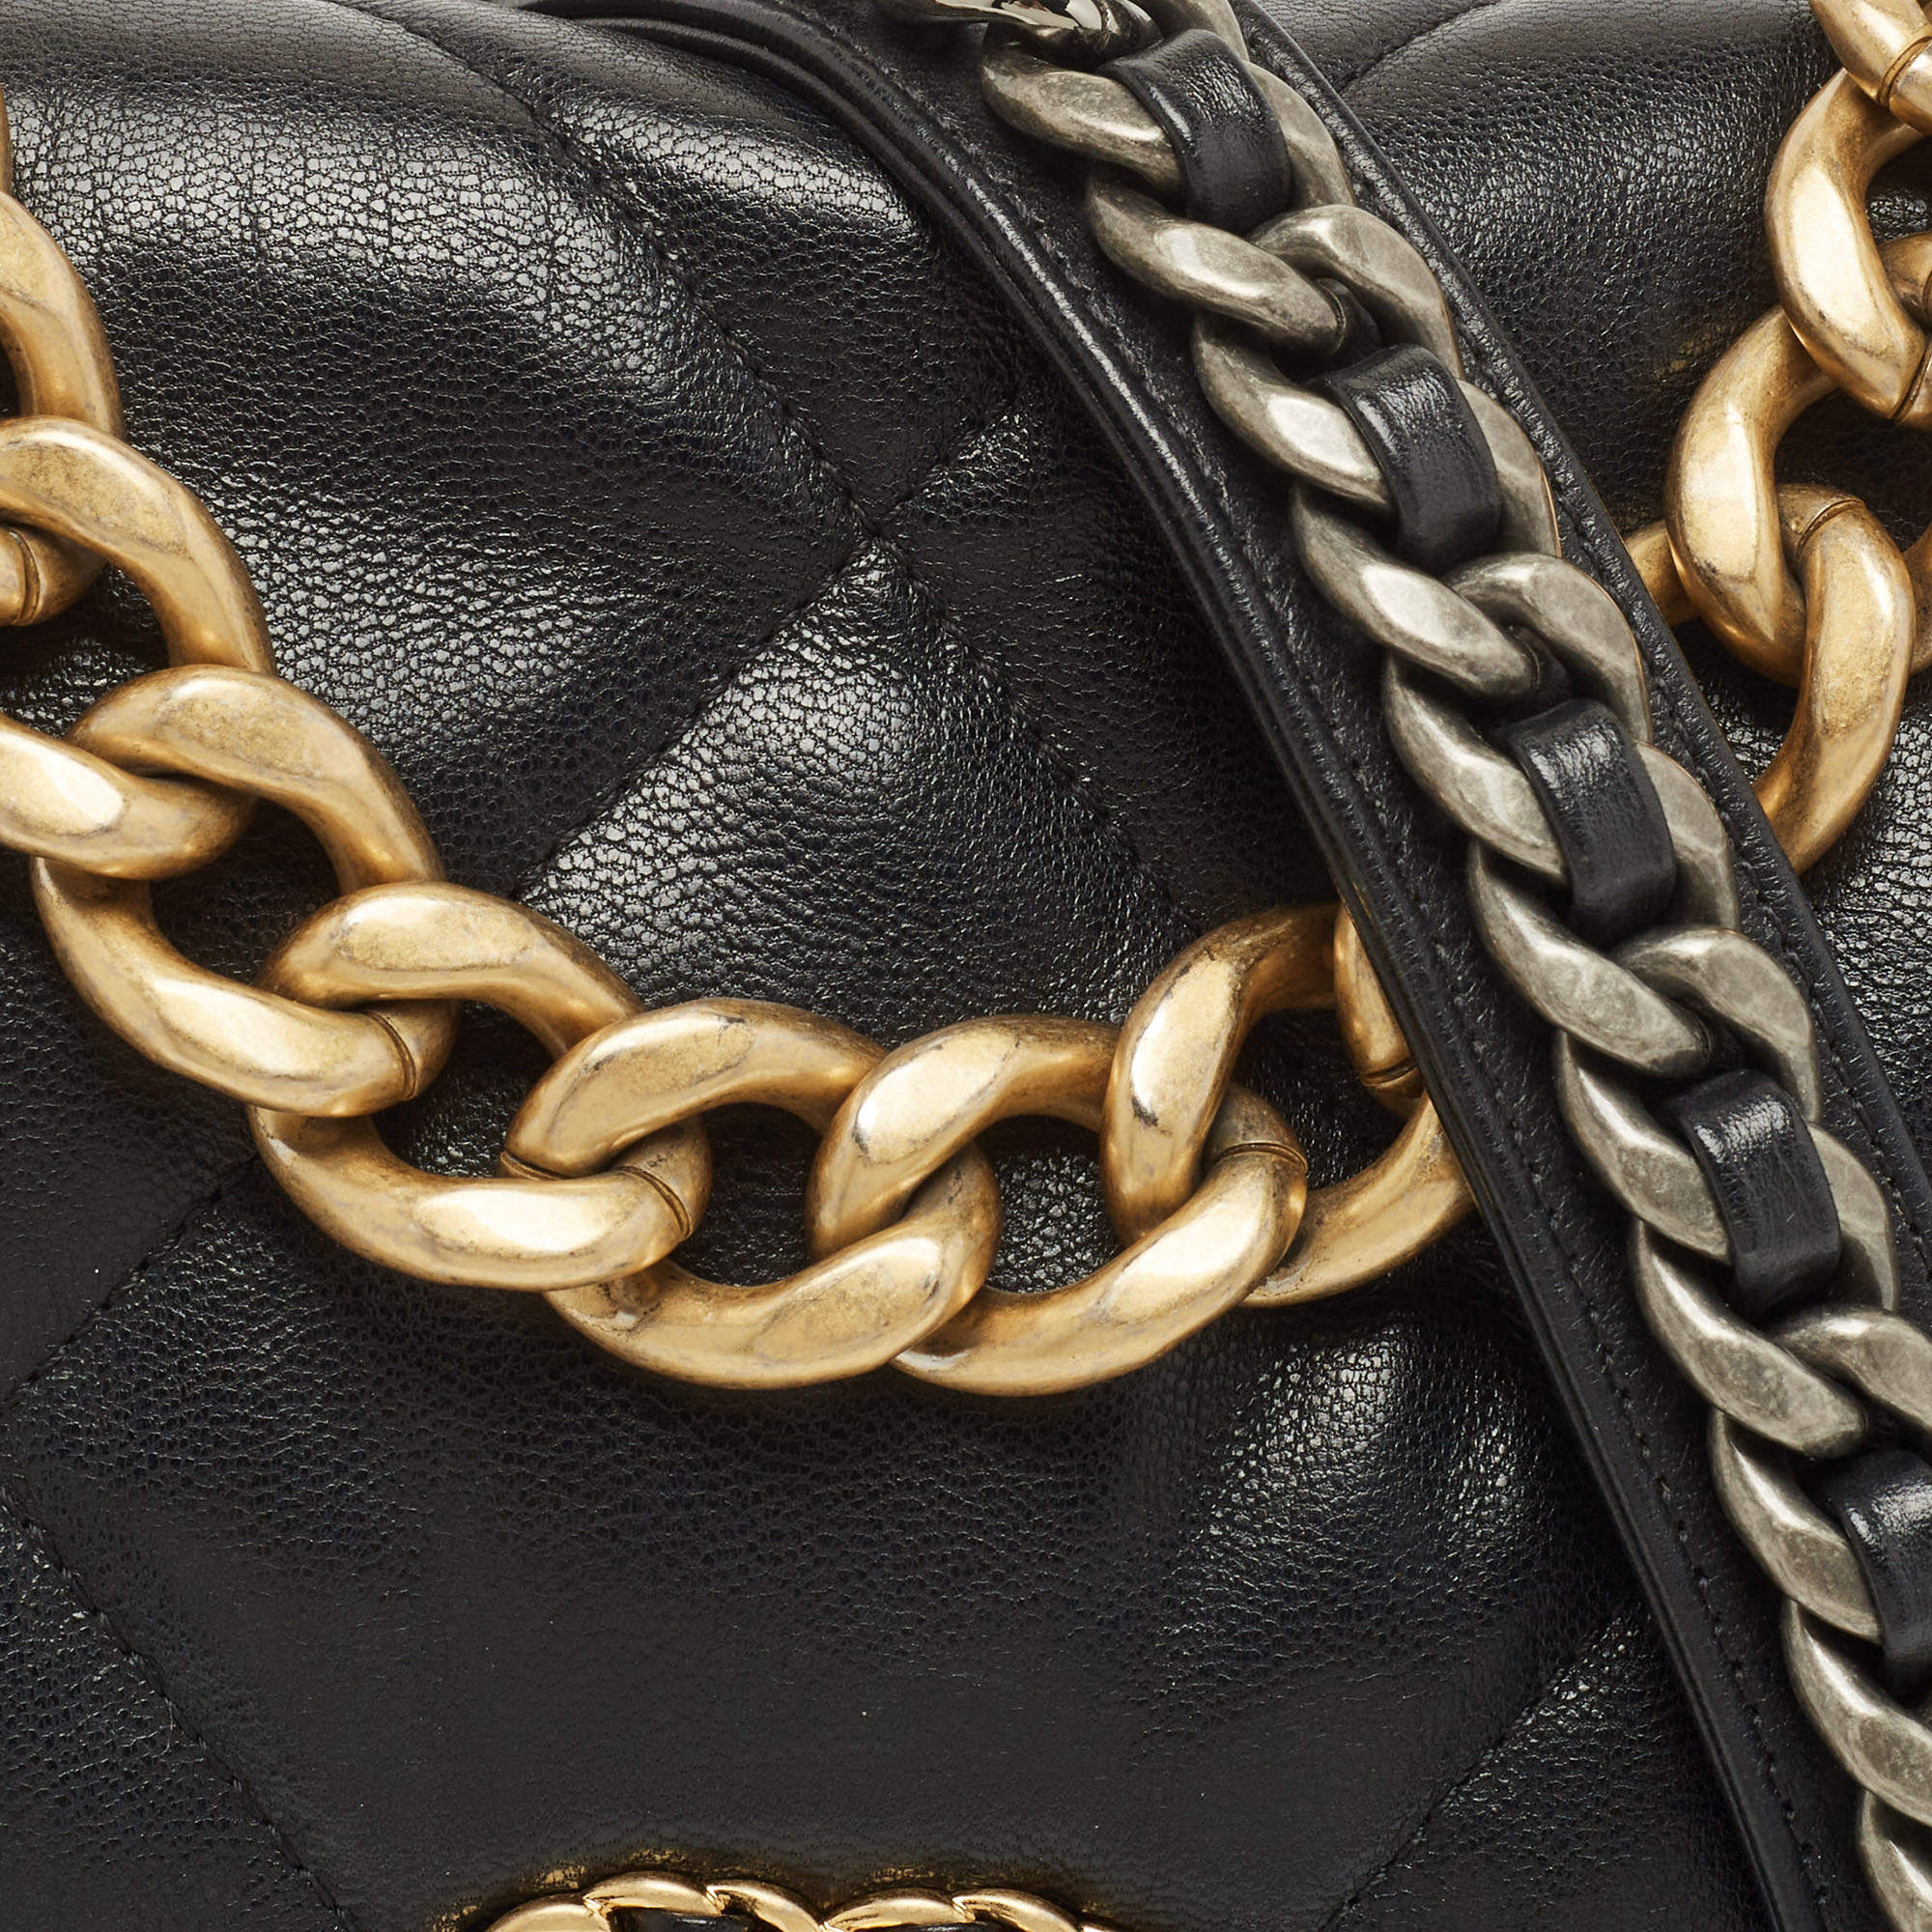 chanel bag with thick chain